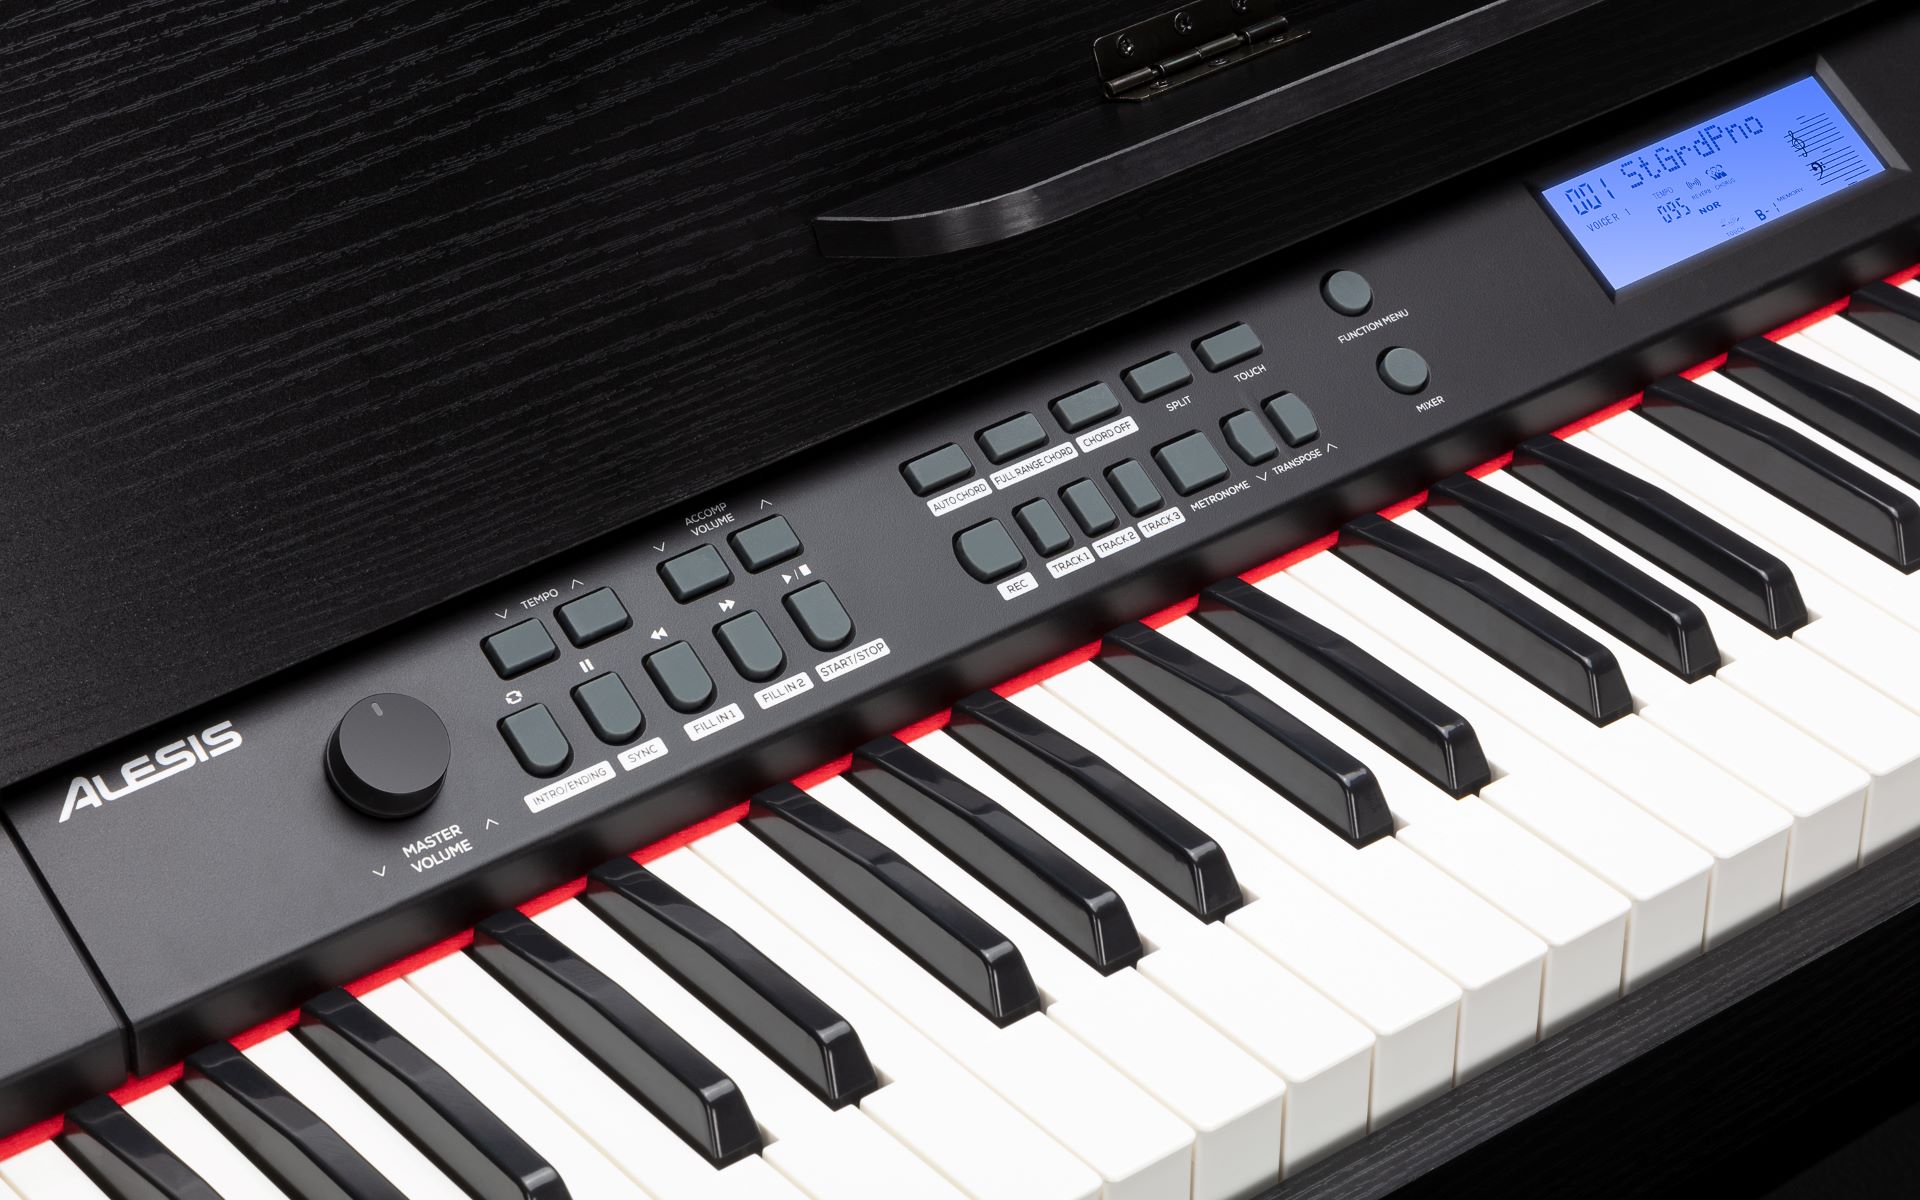 How To Adjust The Volume On A Digital Piano Alesis 88 Key